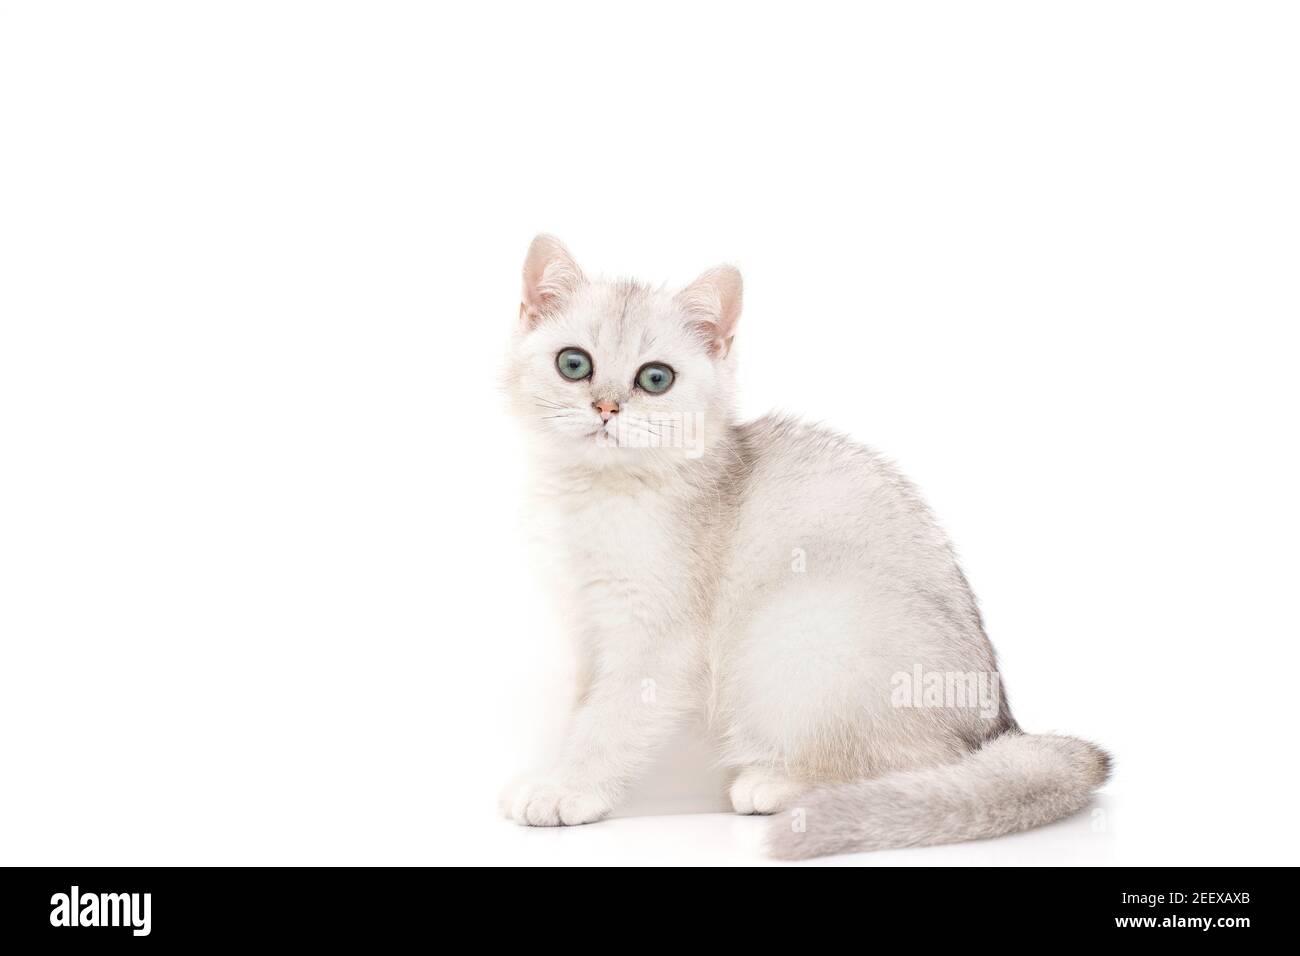 Beautiful white with gray kitten of British breed sits on a white background. Stock Photo